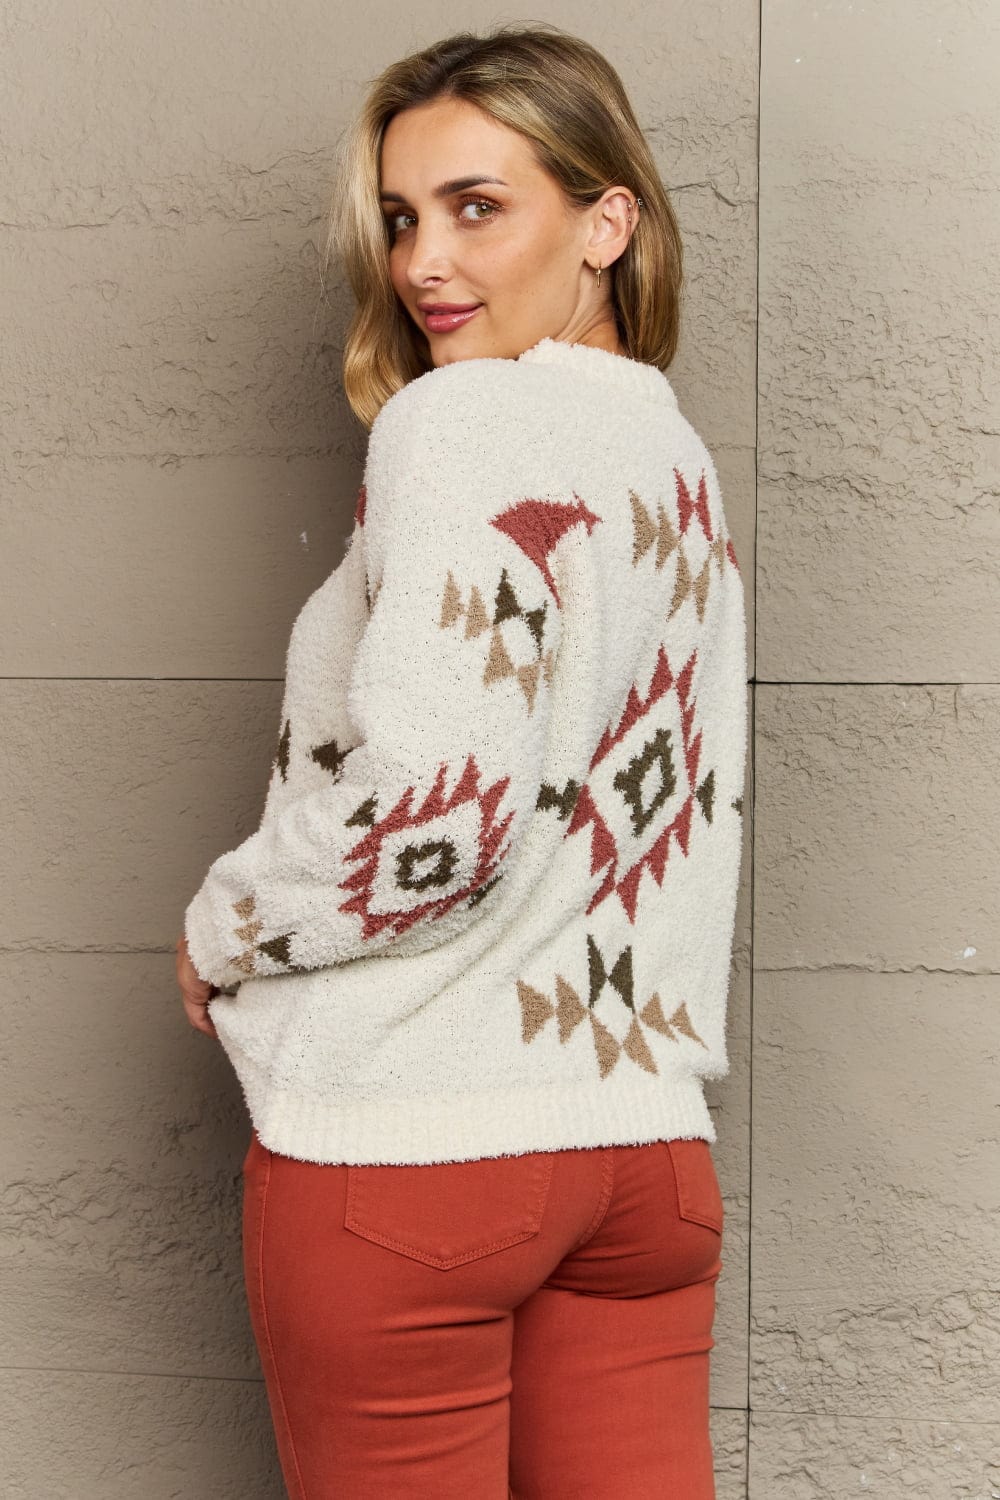 HEYSON Cozy Sunday Aztec Fuzzy Sweater - Cowtown Bling N Things